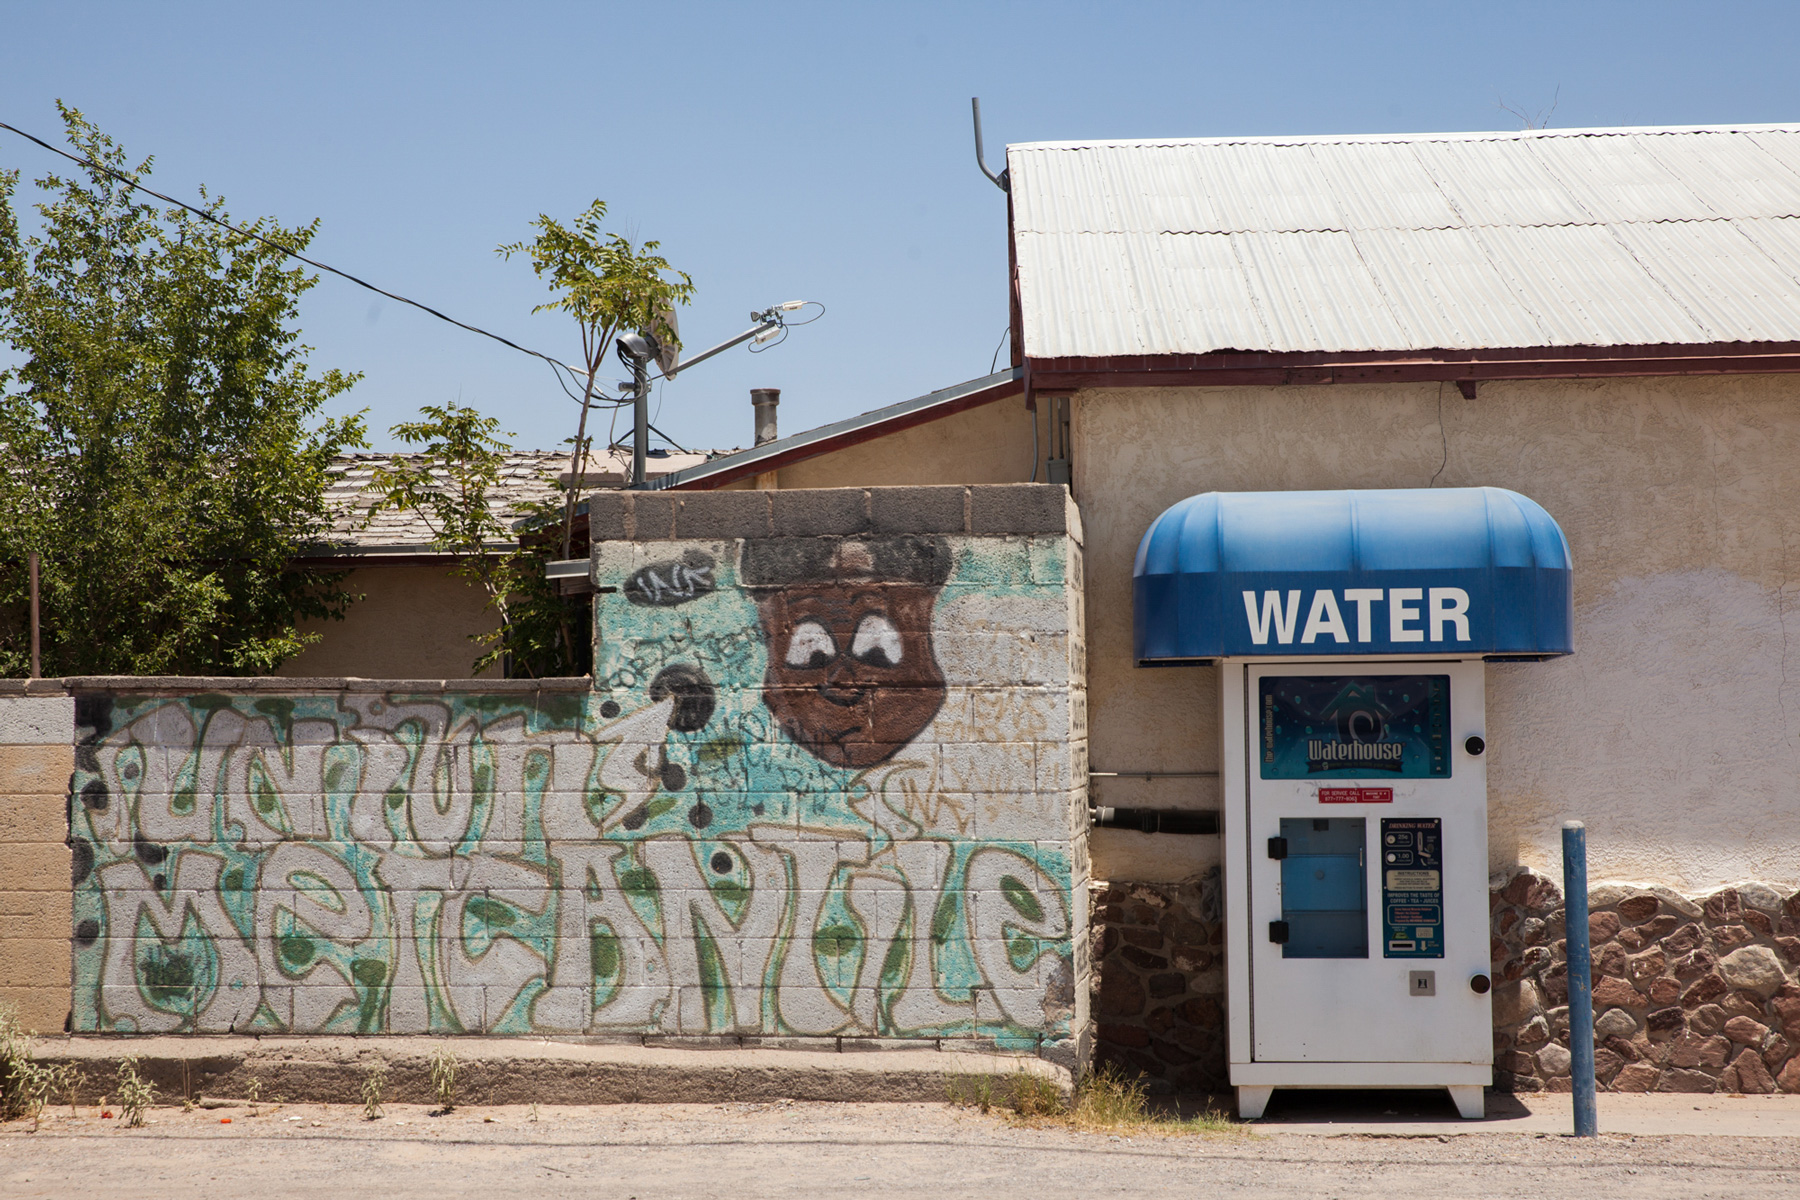 The water in La Union, N.M., had tested positive for arsenic above the legal limit since 2009. Residents said they still don’t drink the tap water, opting instead to fill at the local filling station.  (Maria Esquinca/News21)